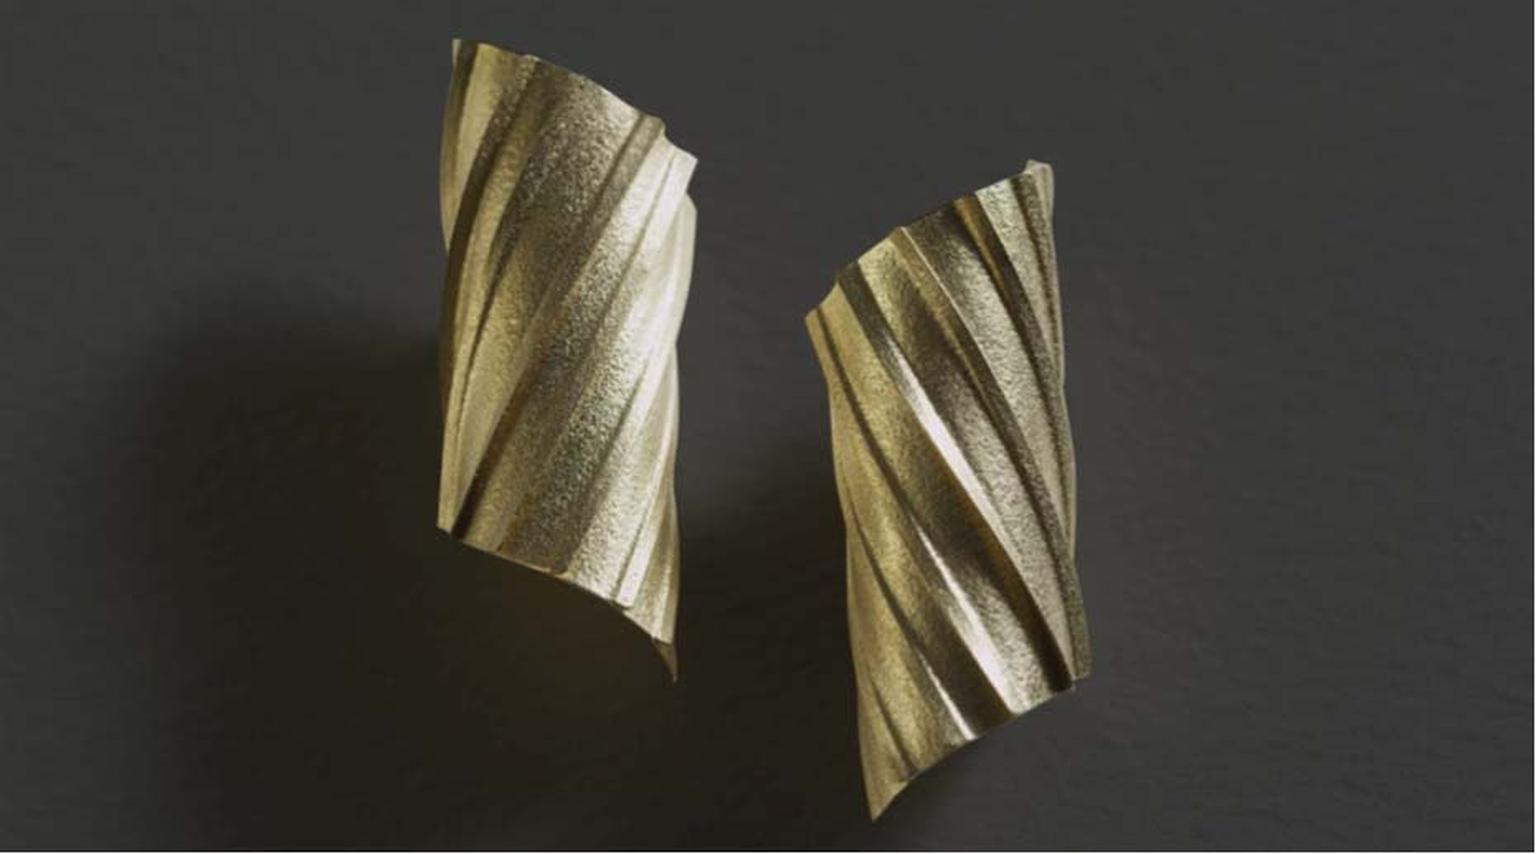 Jacqueline Mina's Pleated Gold jewellery collection plays with the effects of lighting, allowing the light to bounce in different directions.